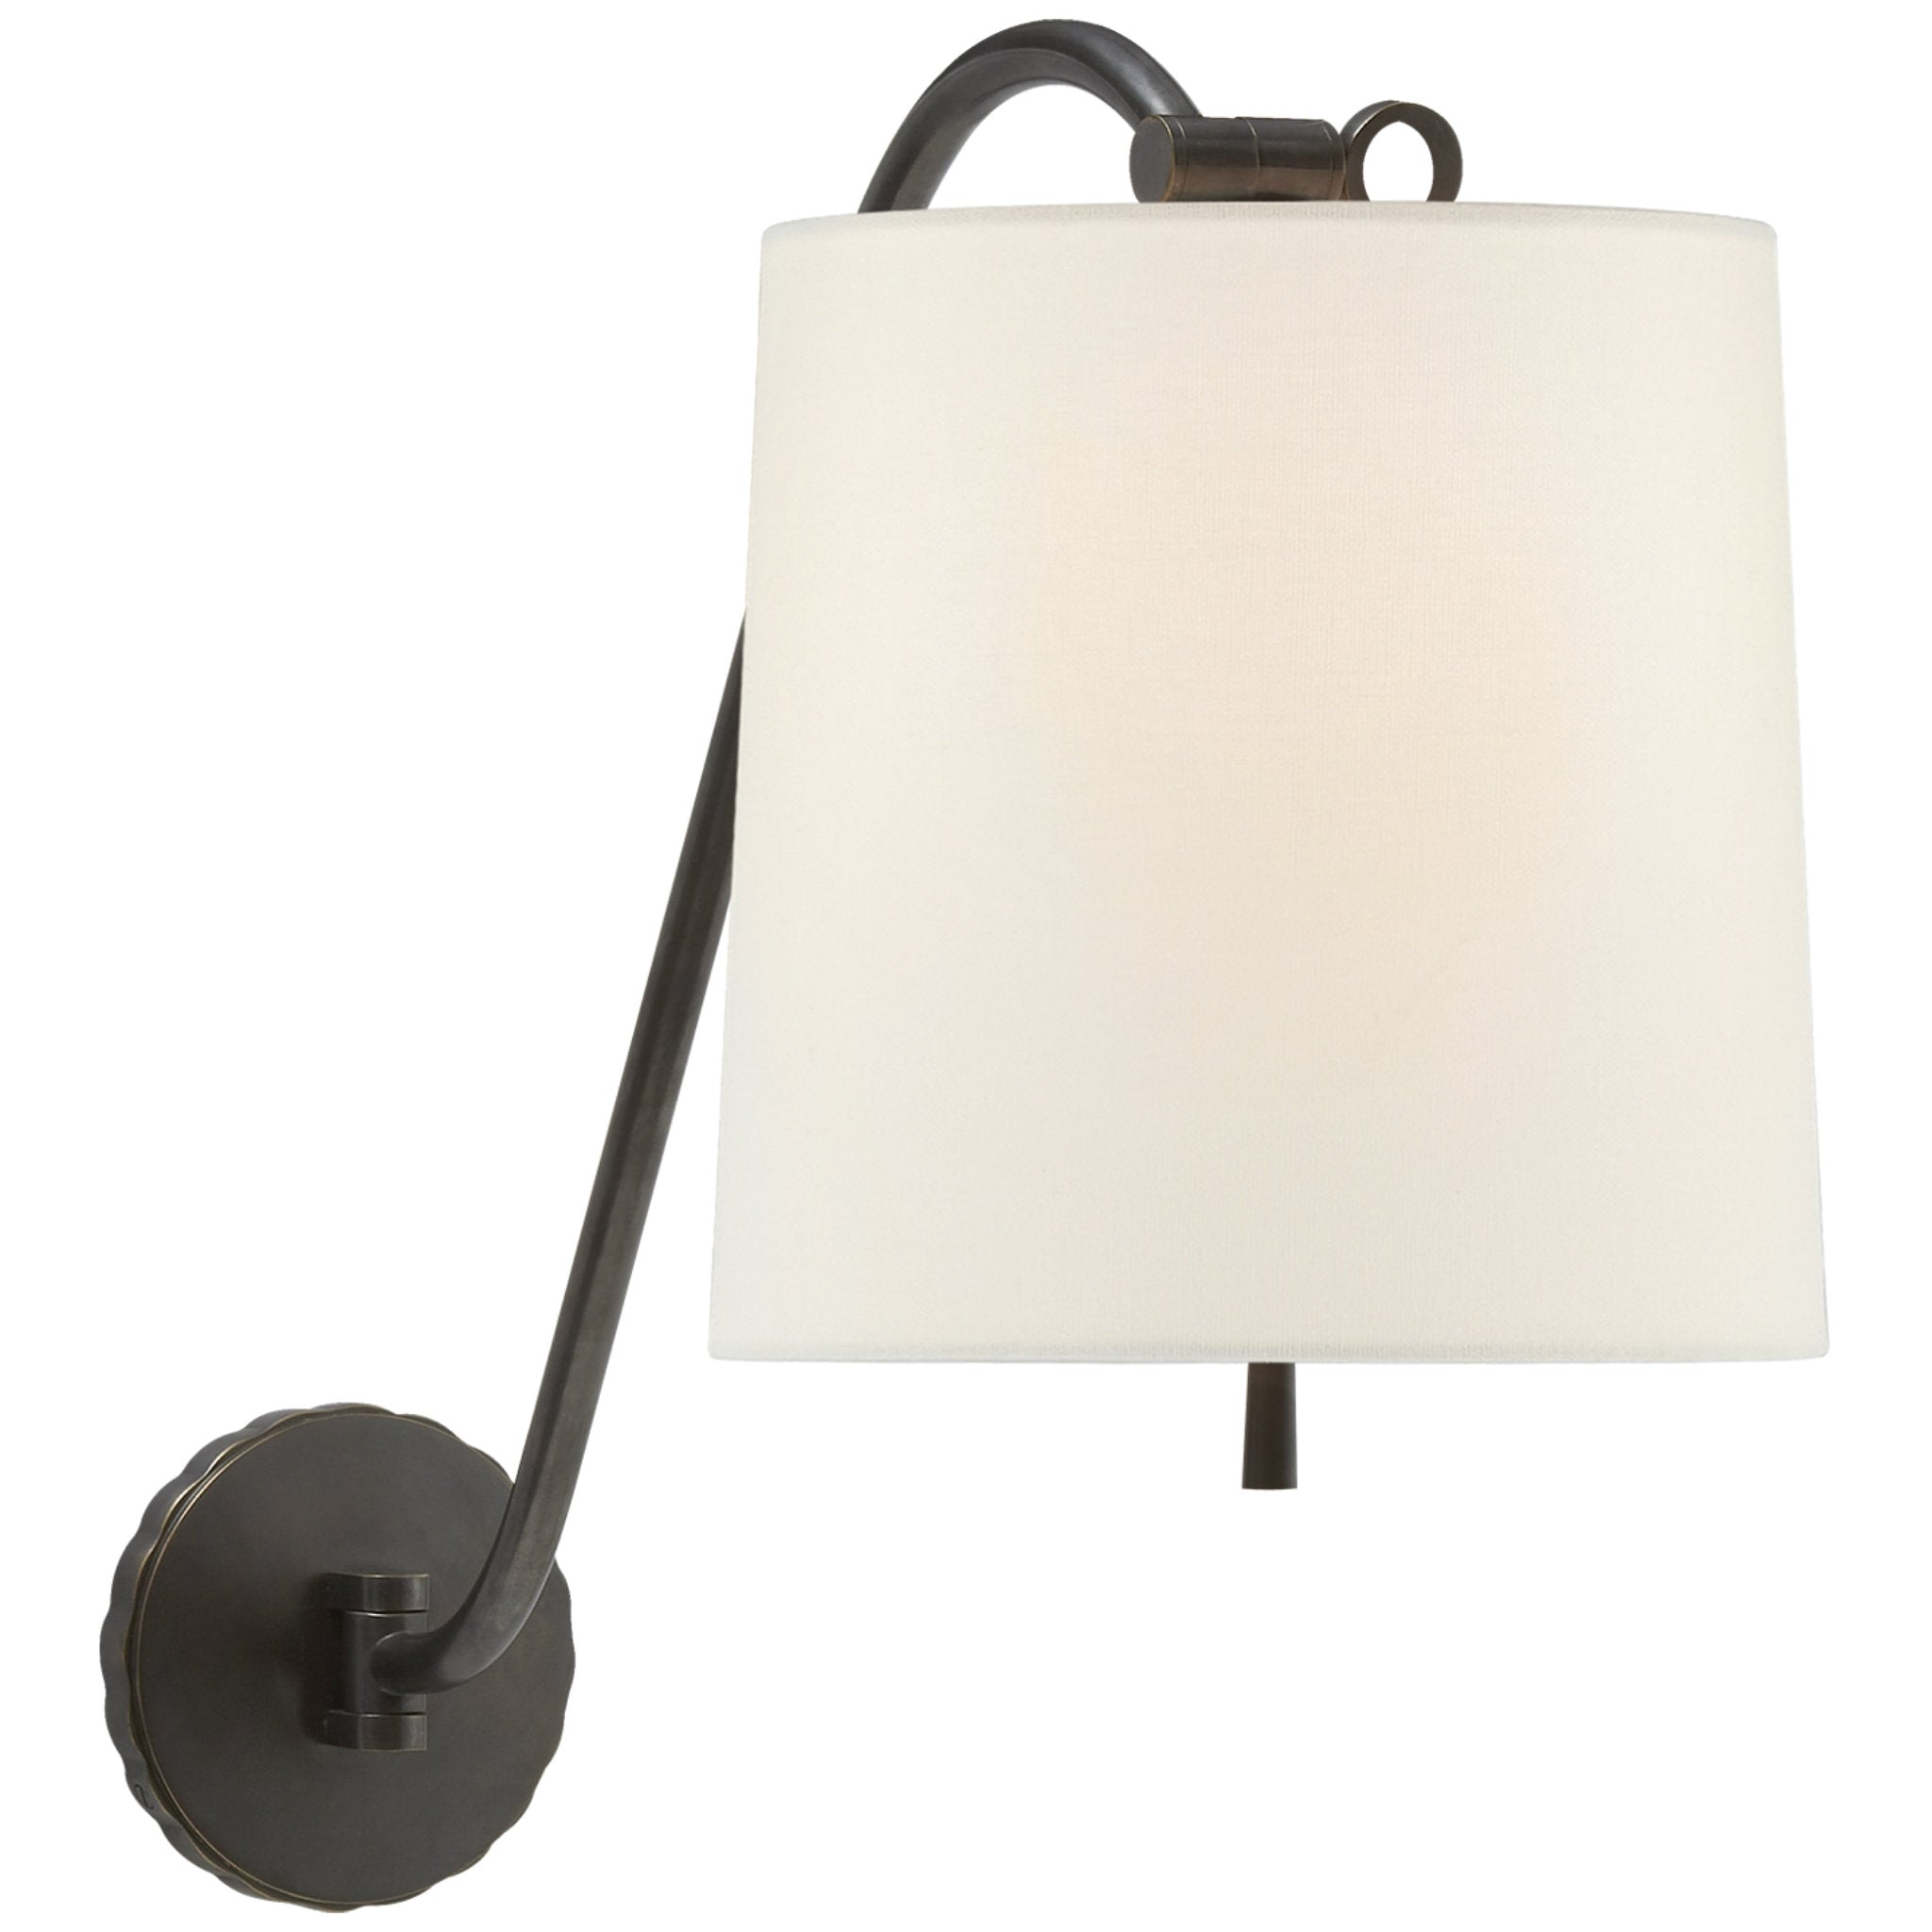 Barbara Barry Understudy Sconce in Bronze with Linen Shade